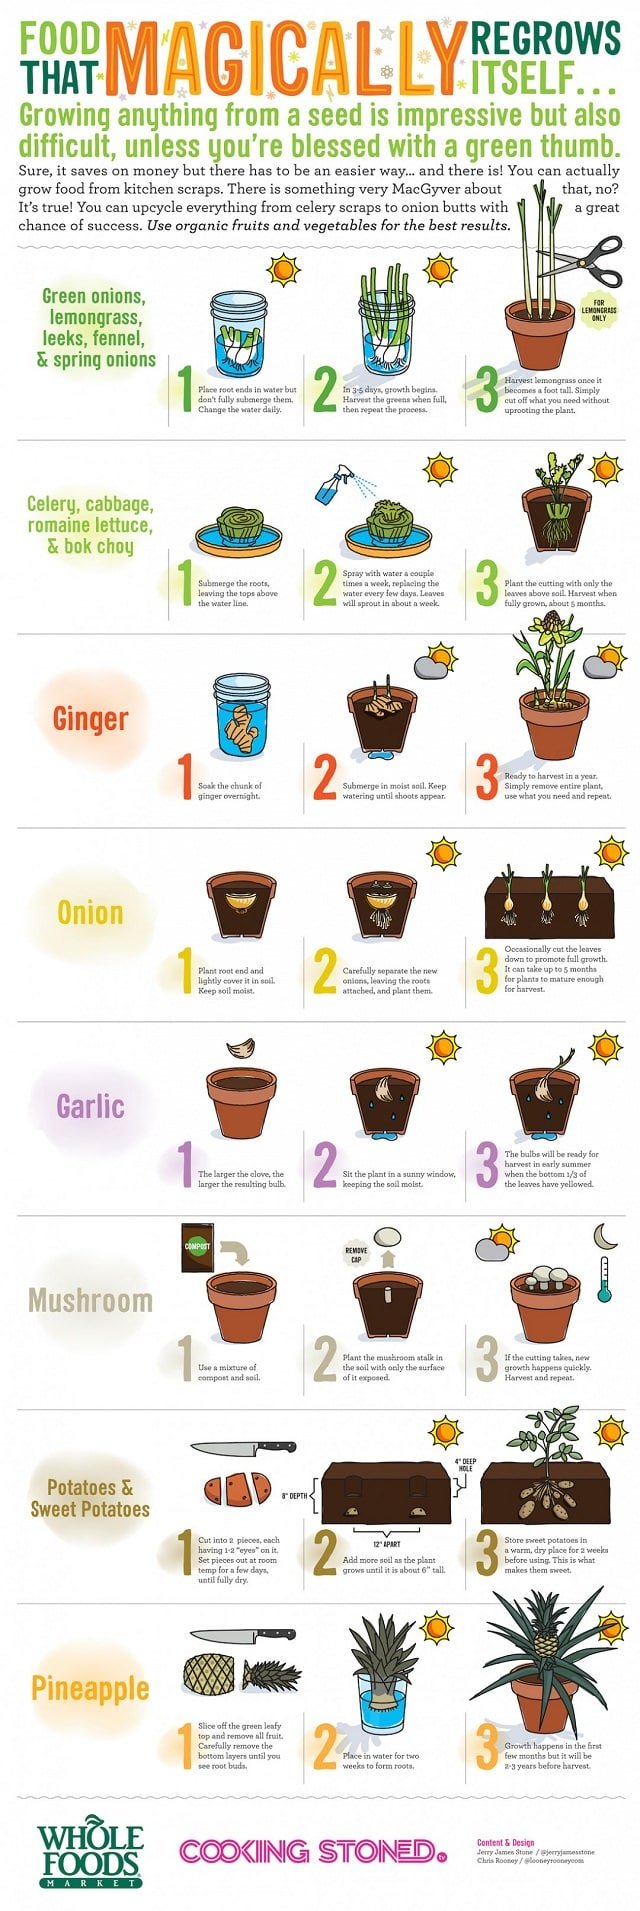 regrow-food-from-kitchen-scraps-inf